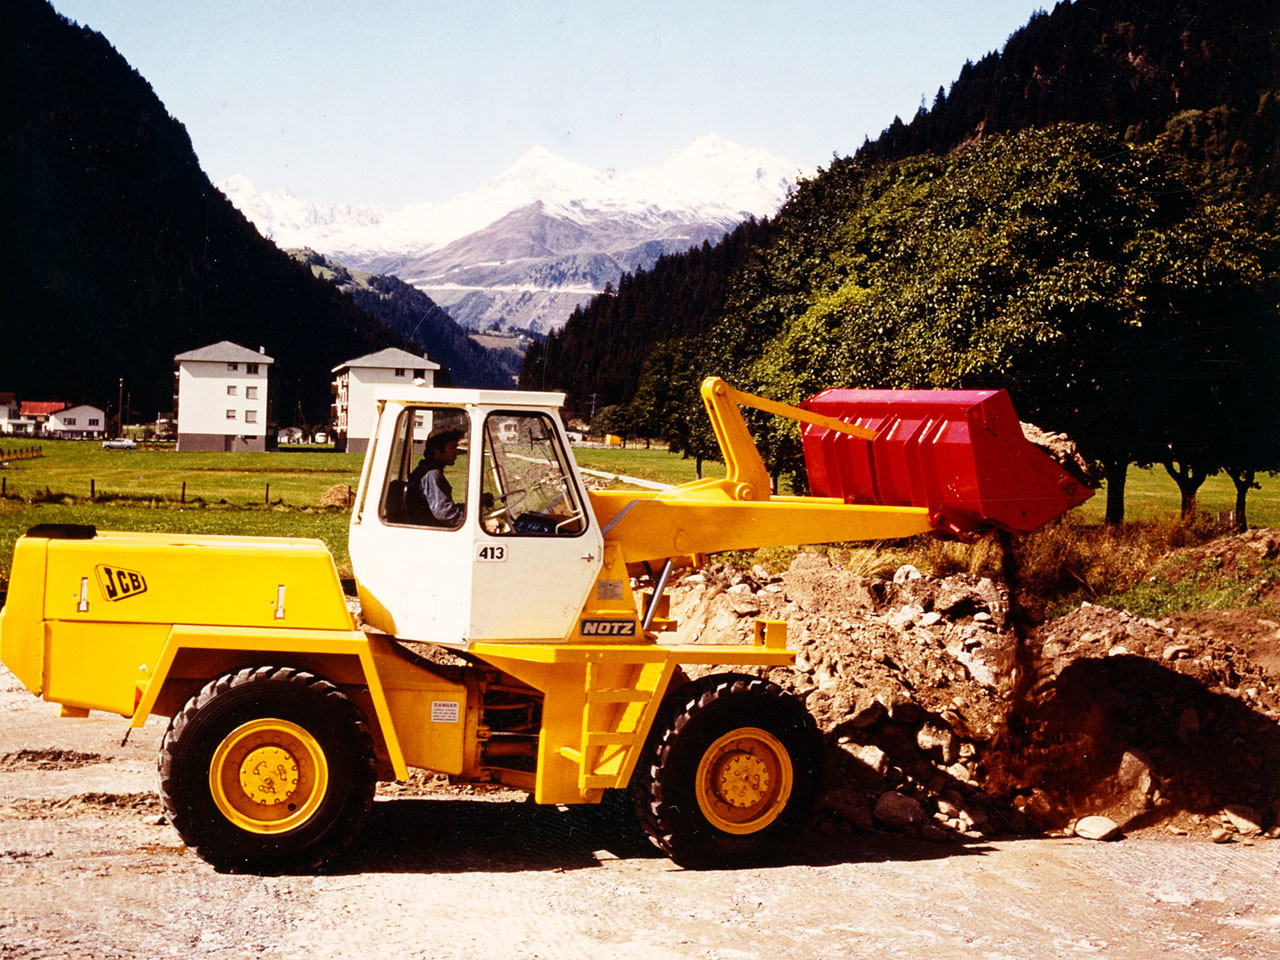 La pala gommata Jcb compie 50 anni 1680x1260_1558611112_1971---along-with-the-418-the-413-was-the-first-jcb-designed-machine-and-they-featured-cabs-mounted-on-the-front-section-of-the-machines